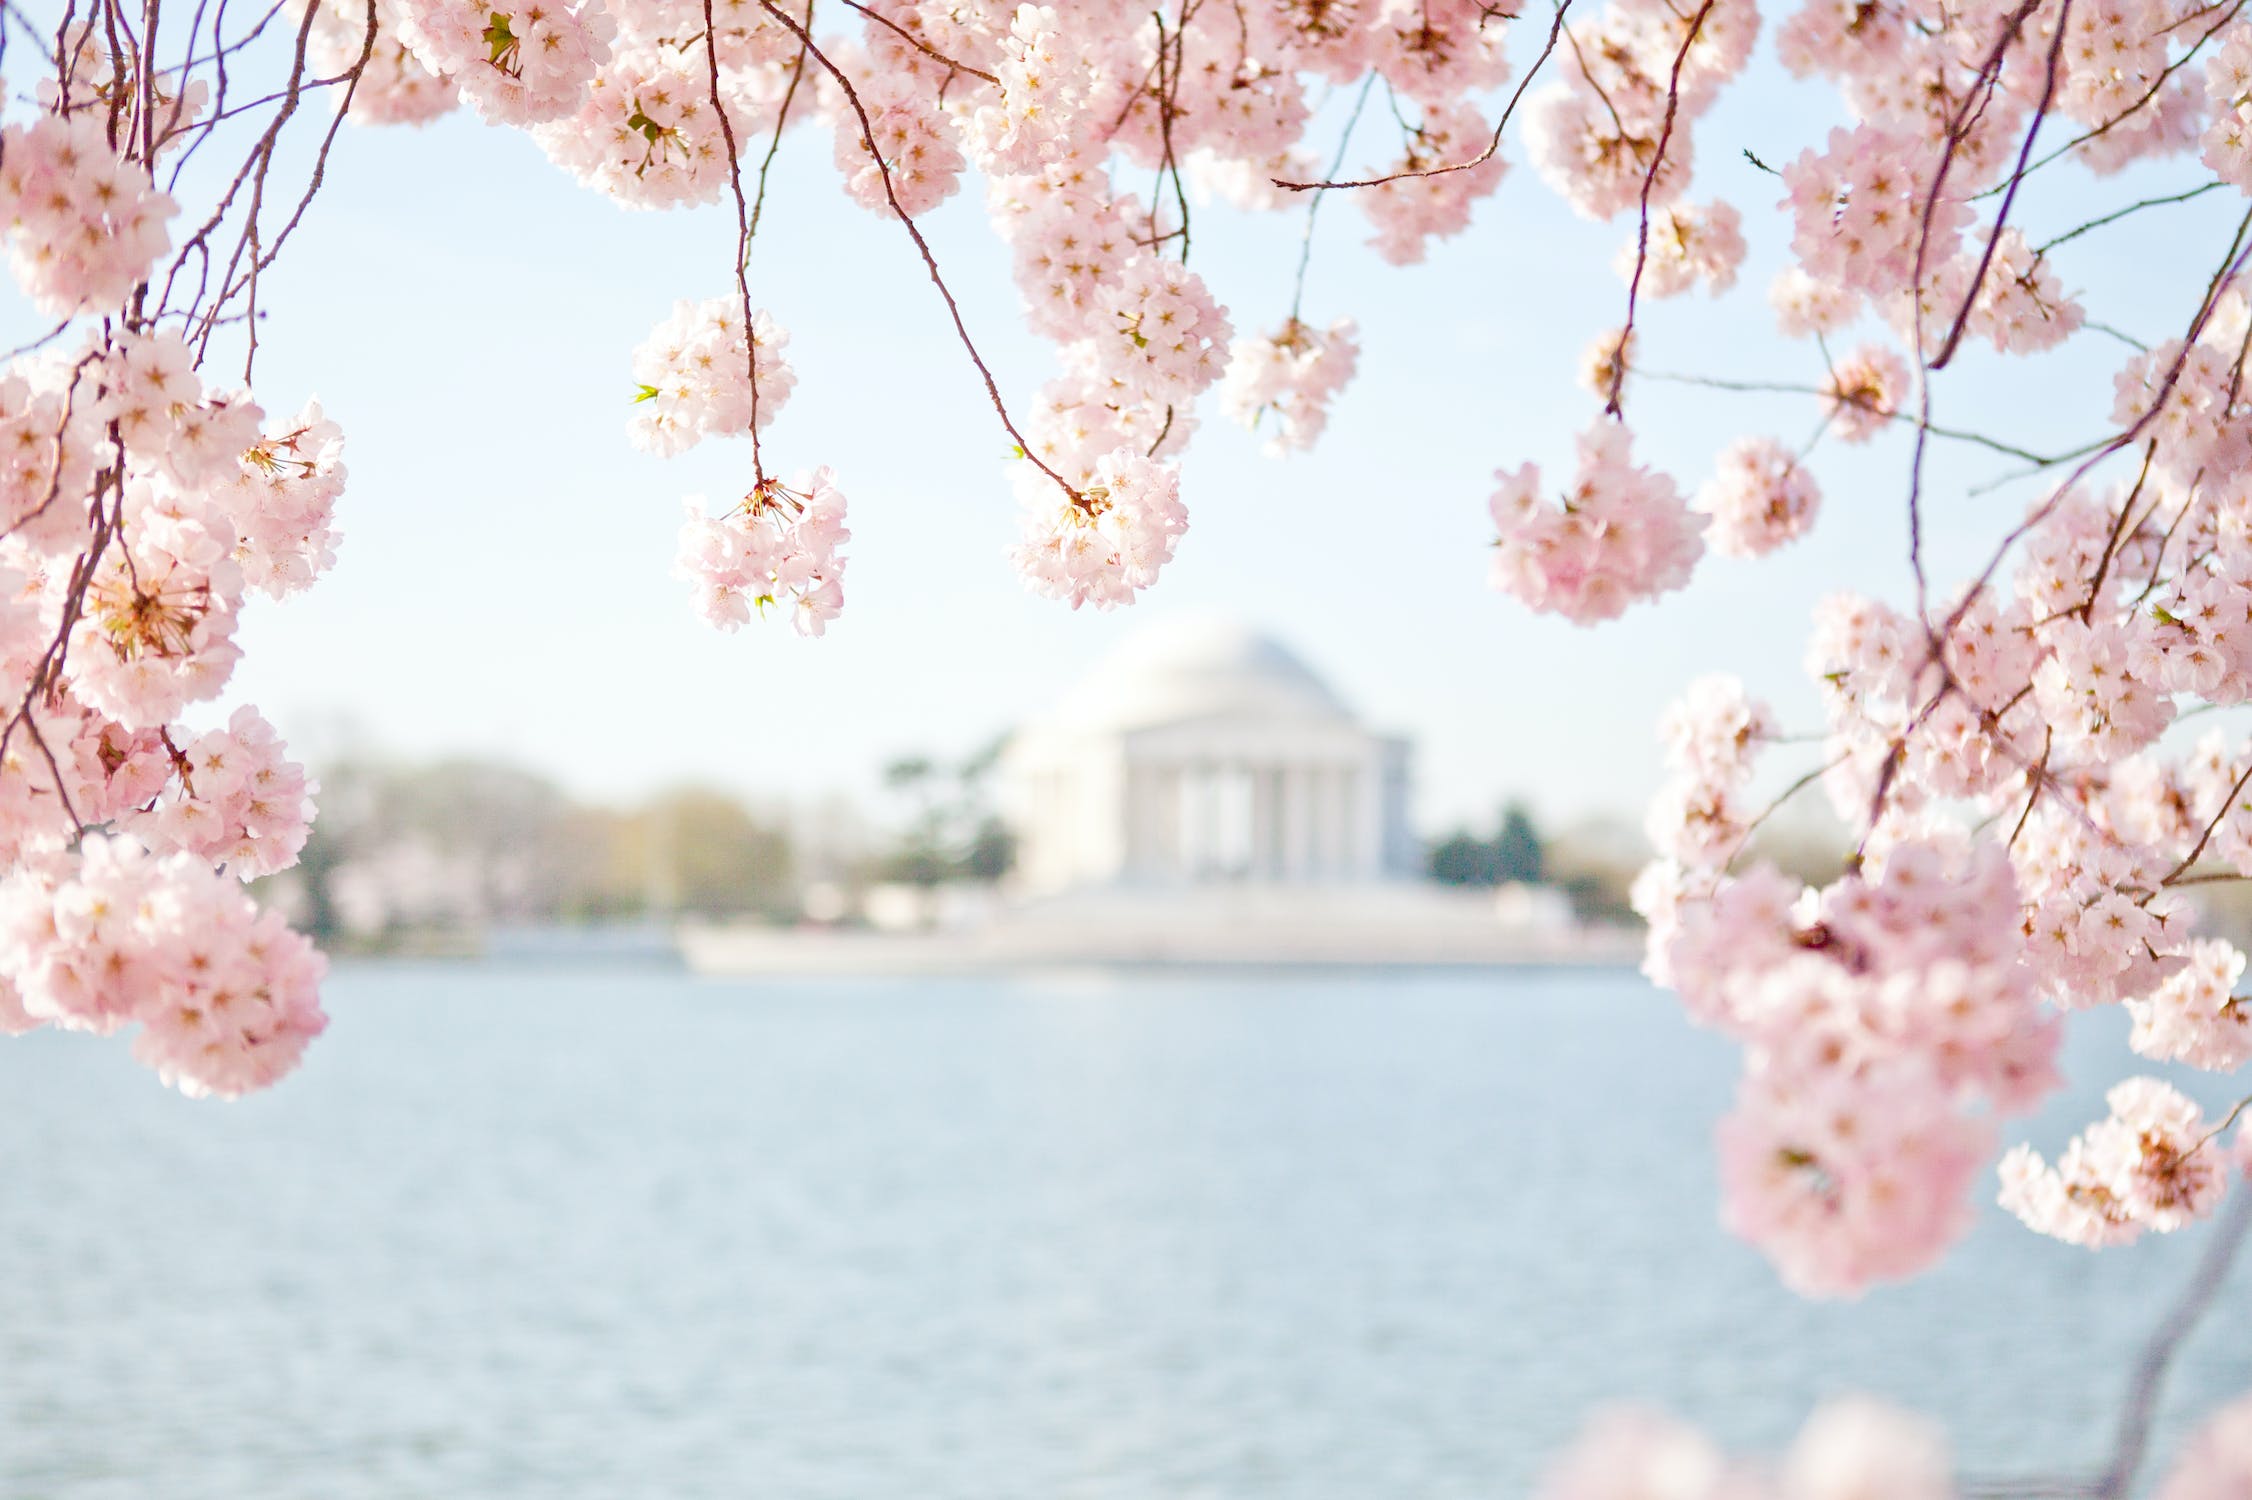 Pale pink cherry blossoms bloom in the foreground with a slightly out-of-focus Jefferson Memorial in the background, Washington, D.C.